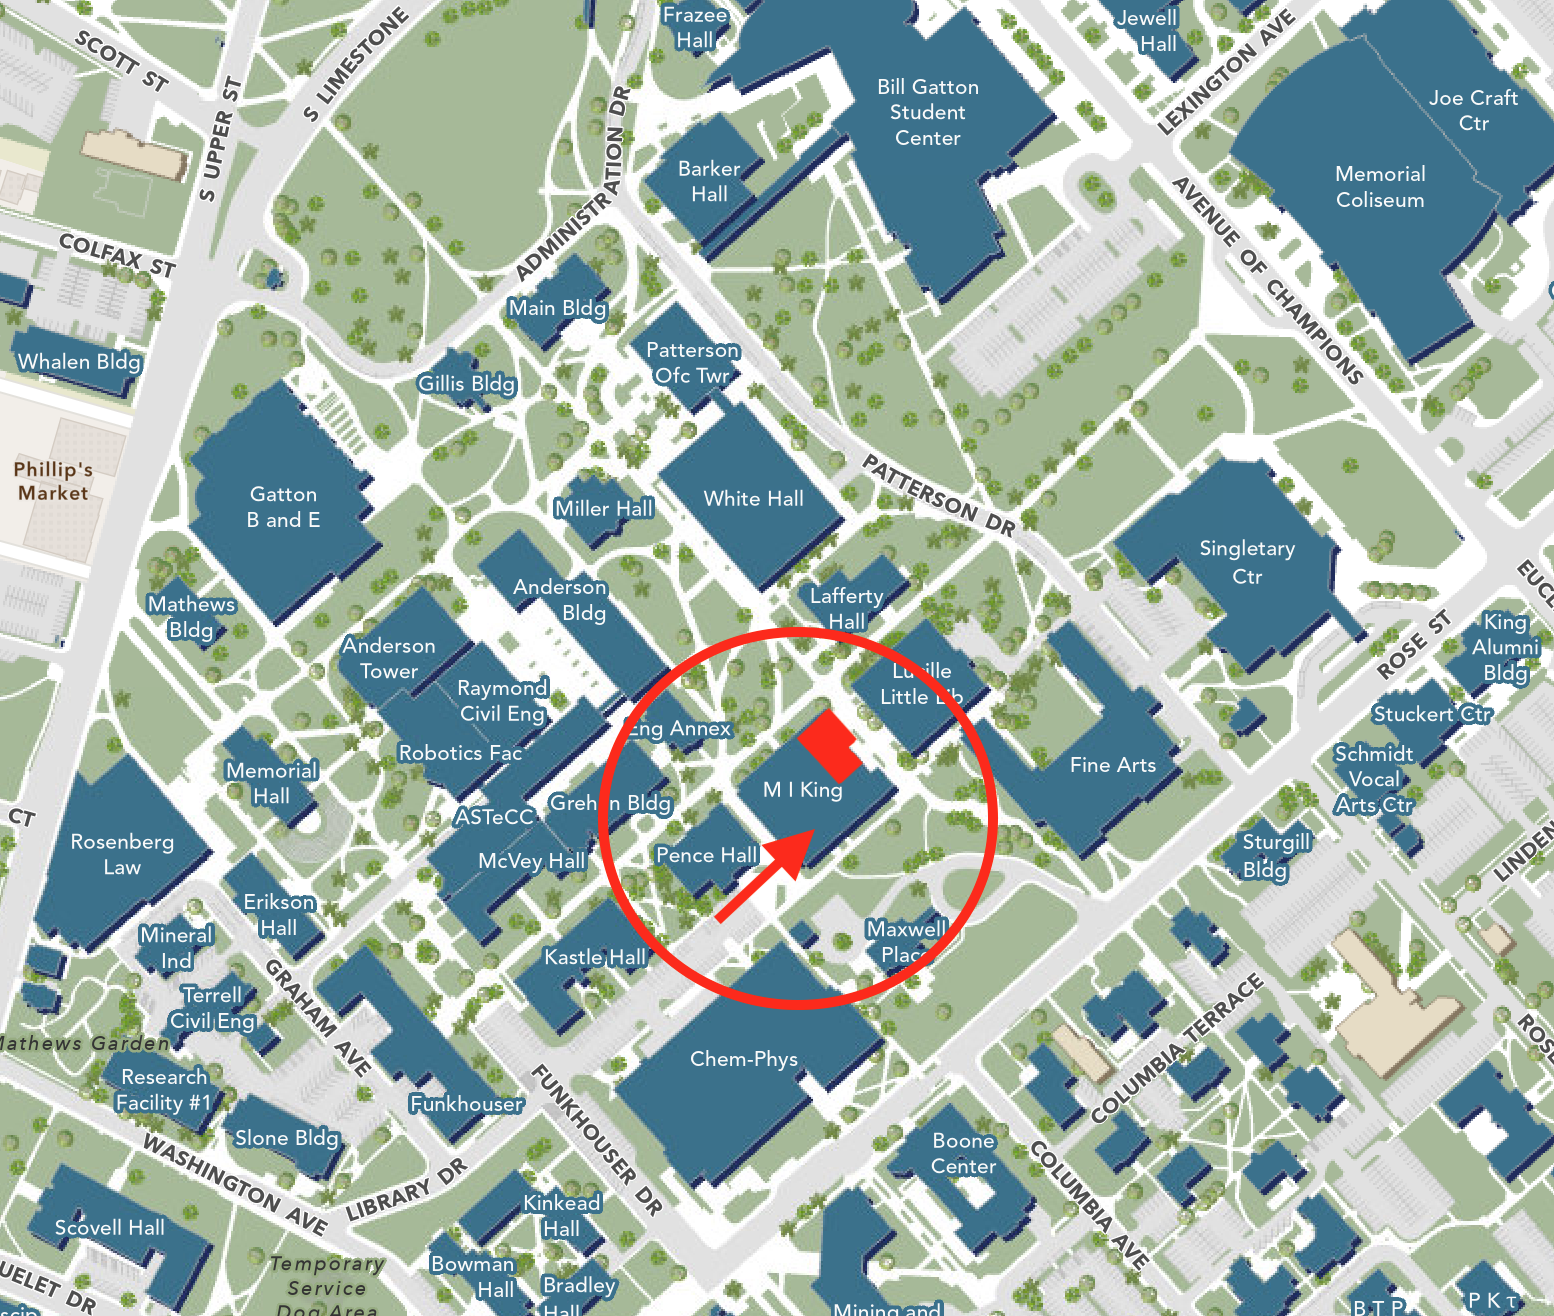 detail of UK campus map with celt location marked in red